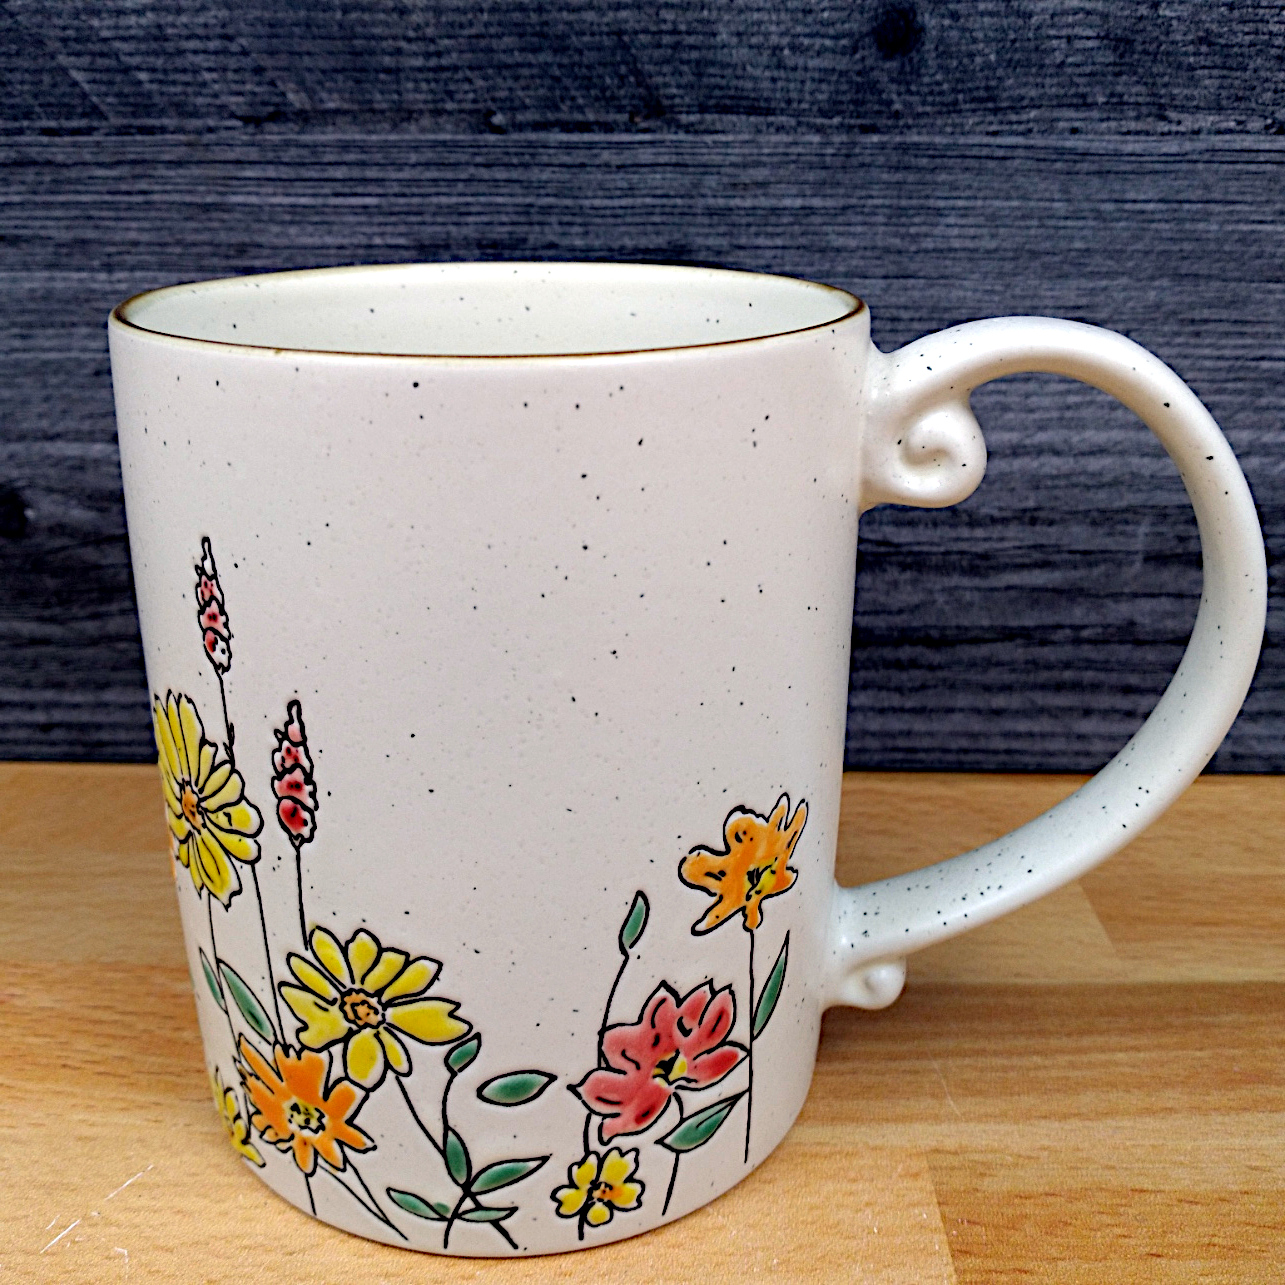 This Autumn Valley Coffee Mug Beverage Embossed Tea Cup 16oz 473ml by Blue Sky is made with love by Premier Homegoods! Shop more unique gift ideas today with Spots Initiatives, the best way to support creators.